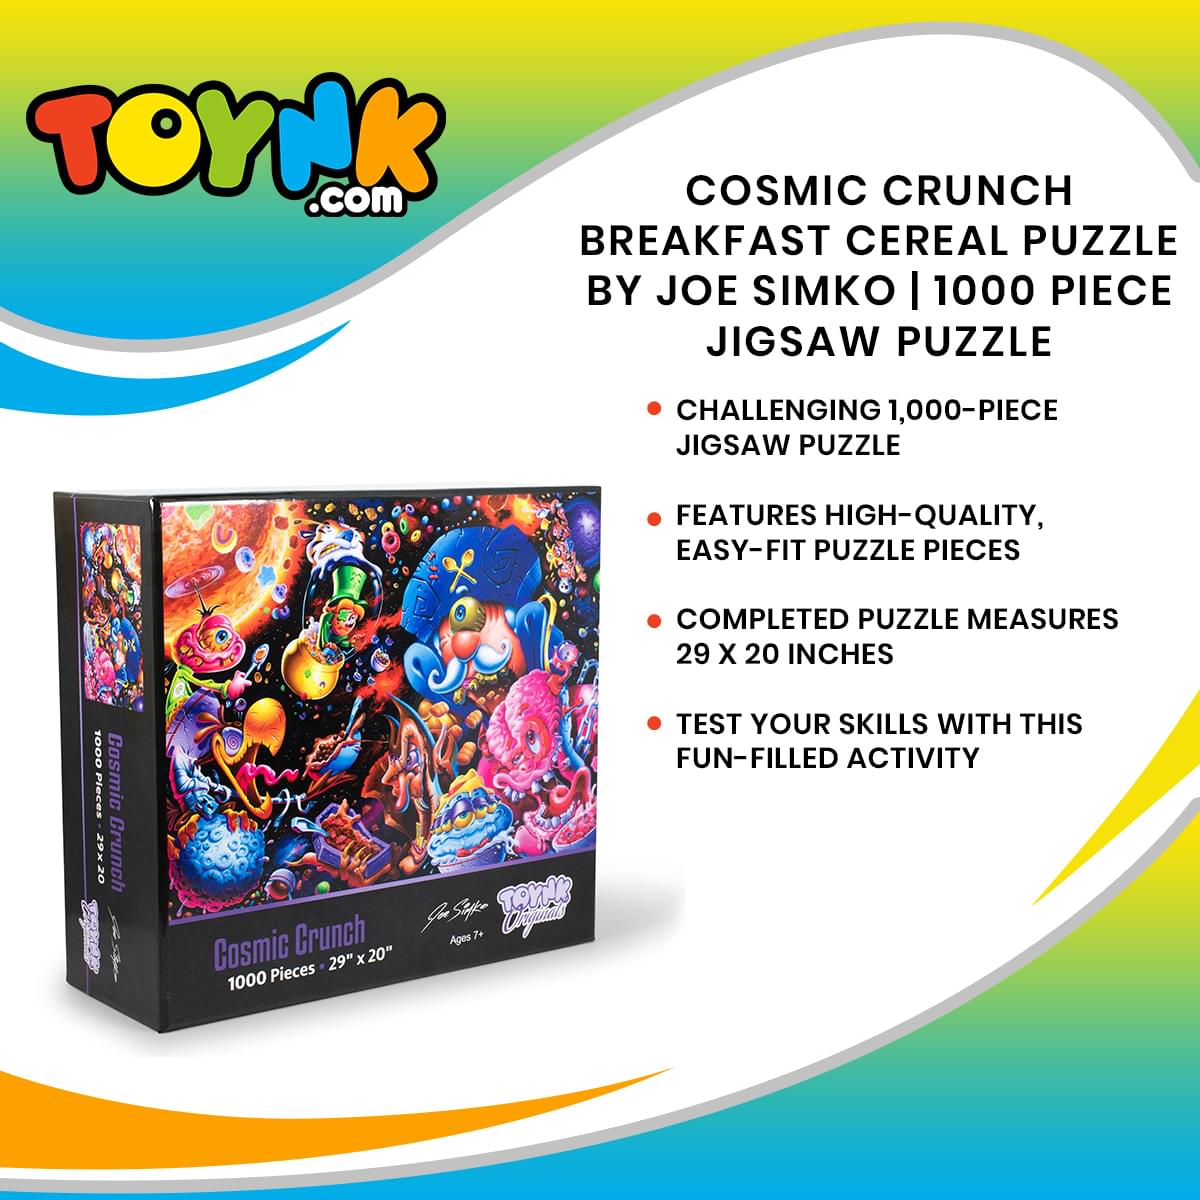 Cosmic Crunch Breakfast Cereal Puzzle By Joe Simko | 1000 Piece Jigsaw Puzzle